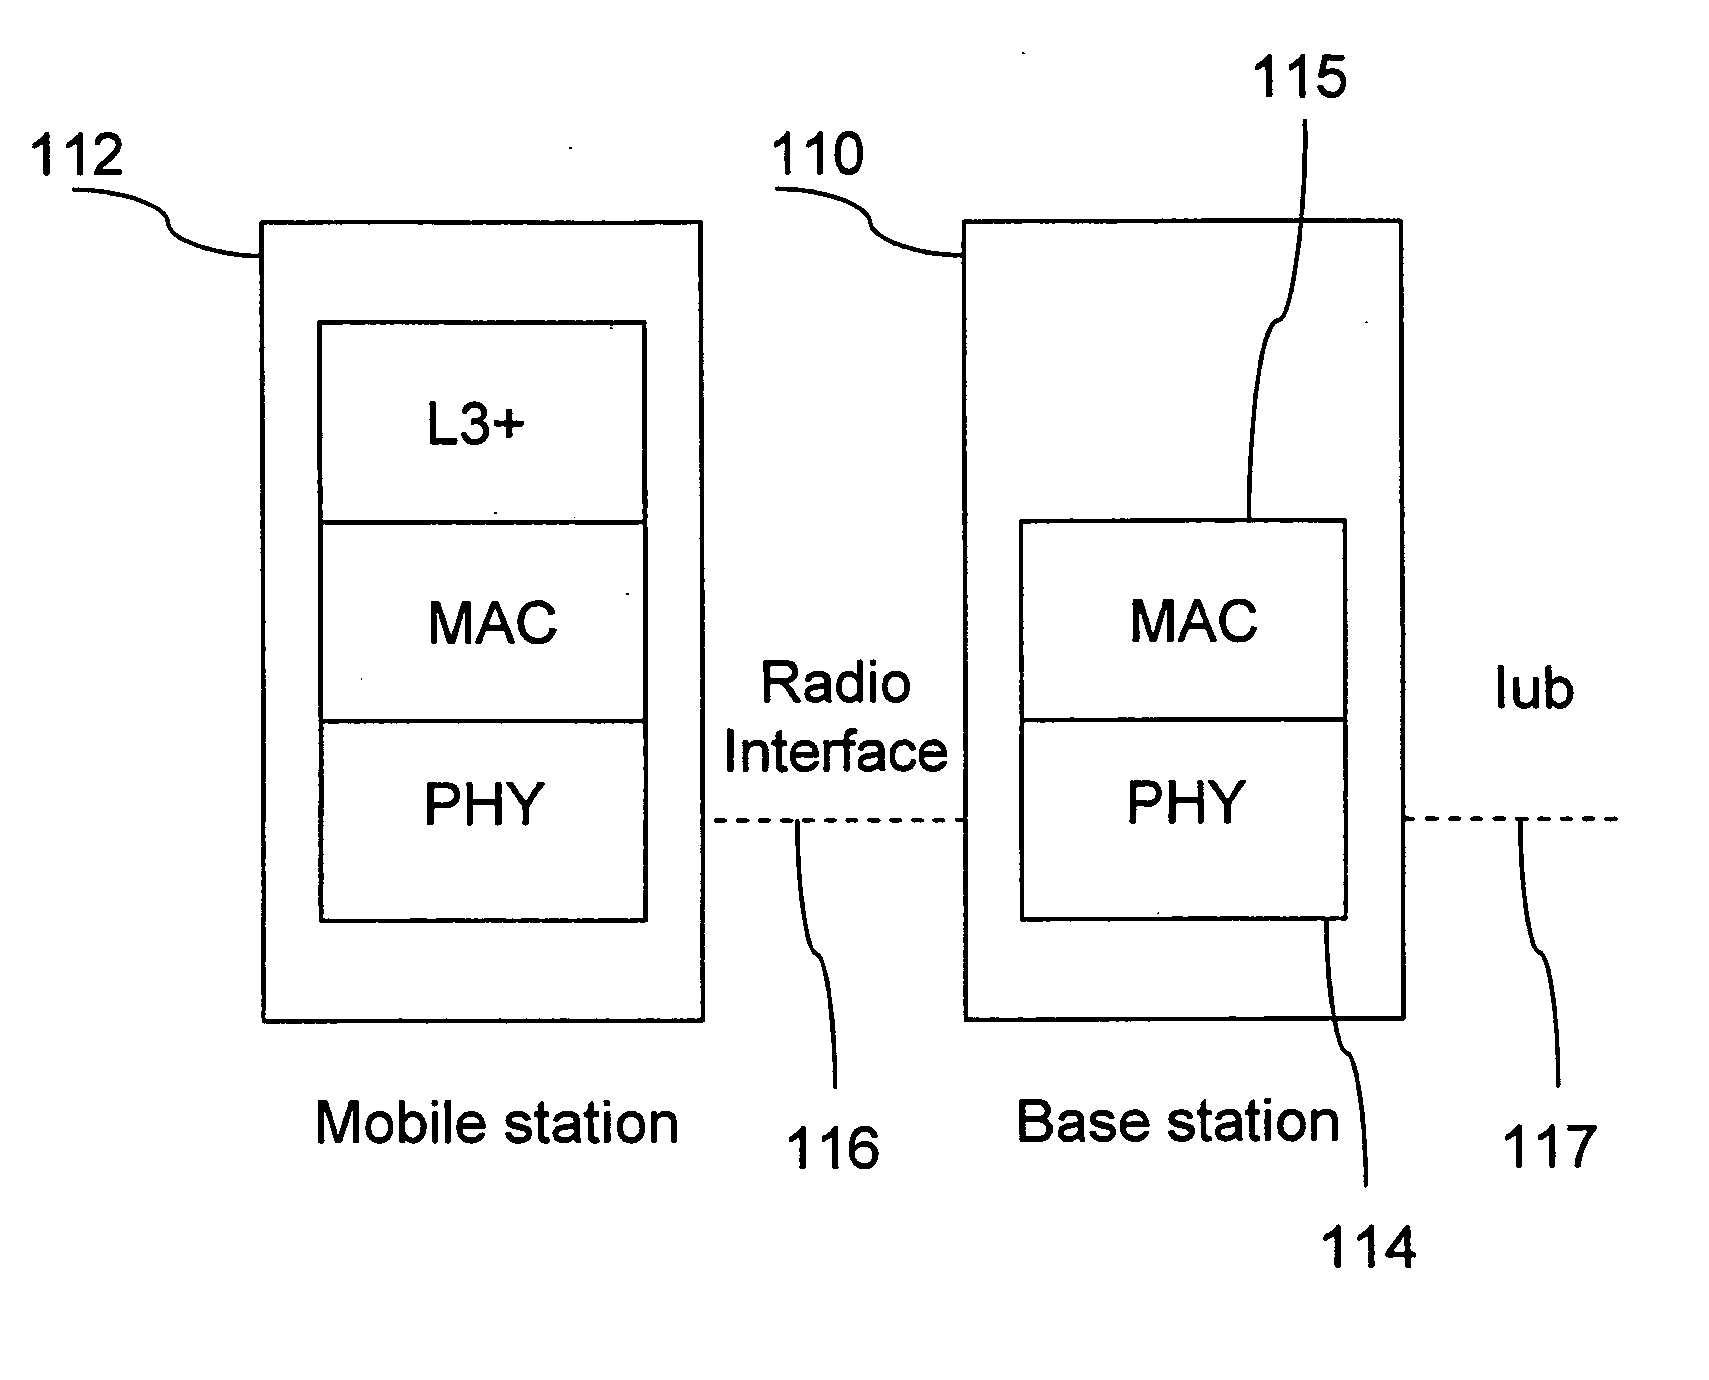 Enhanced processing methods for wireless base stations